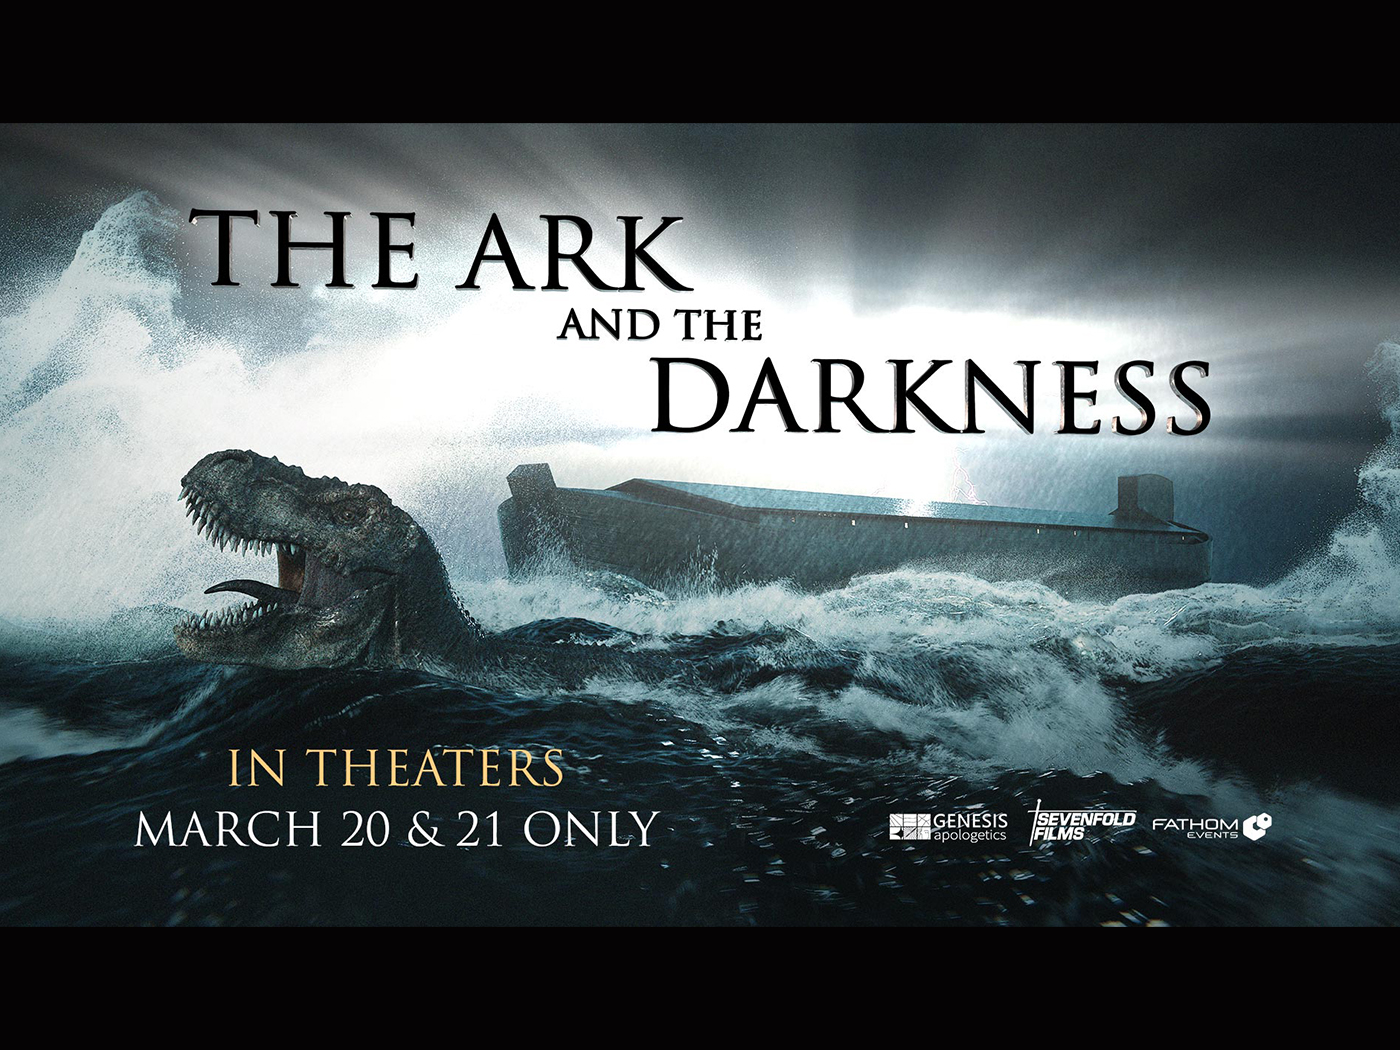 In Theaters March 20 & 21: The Ark and the Darkness